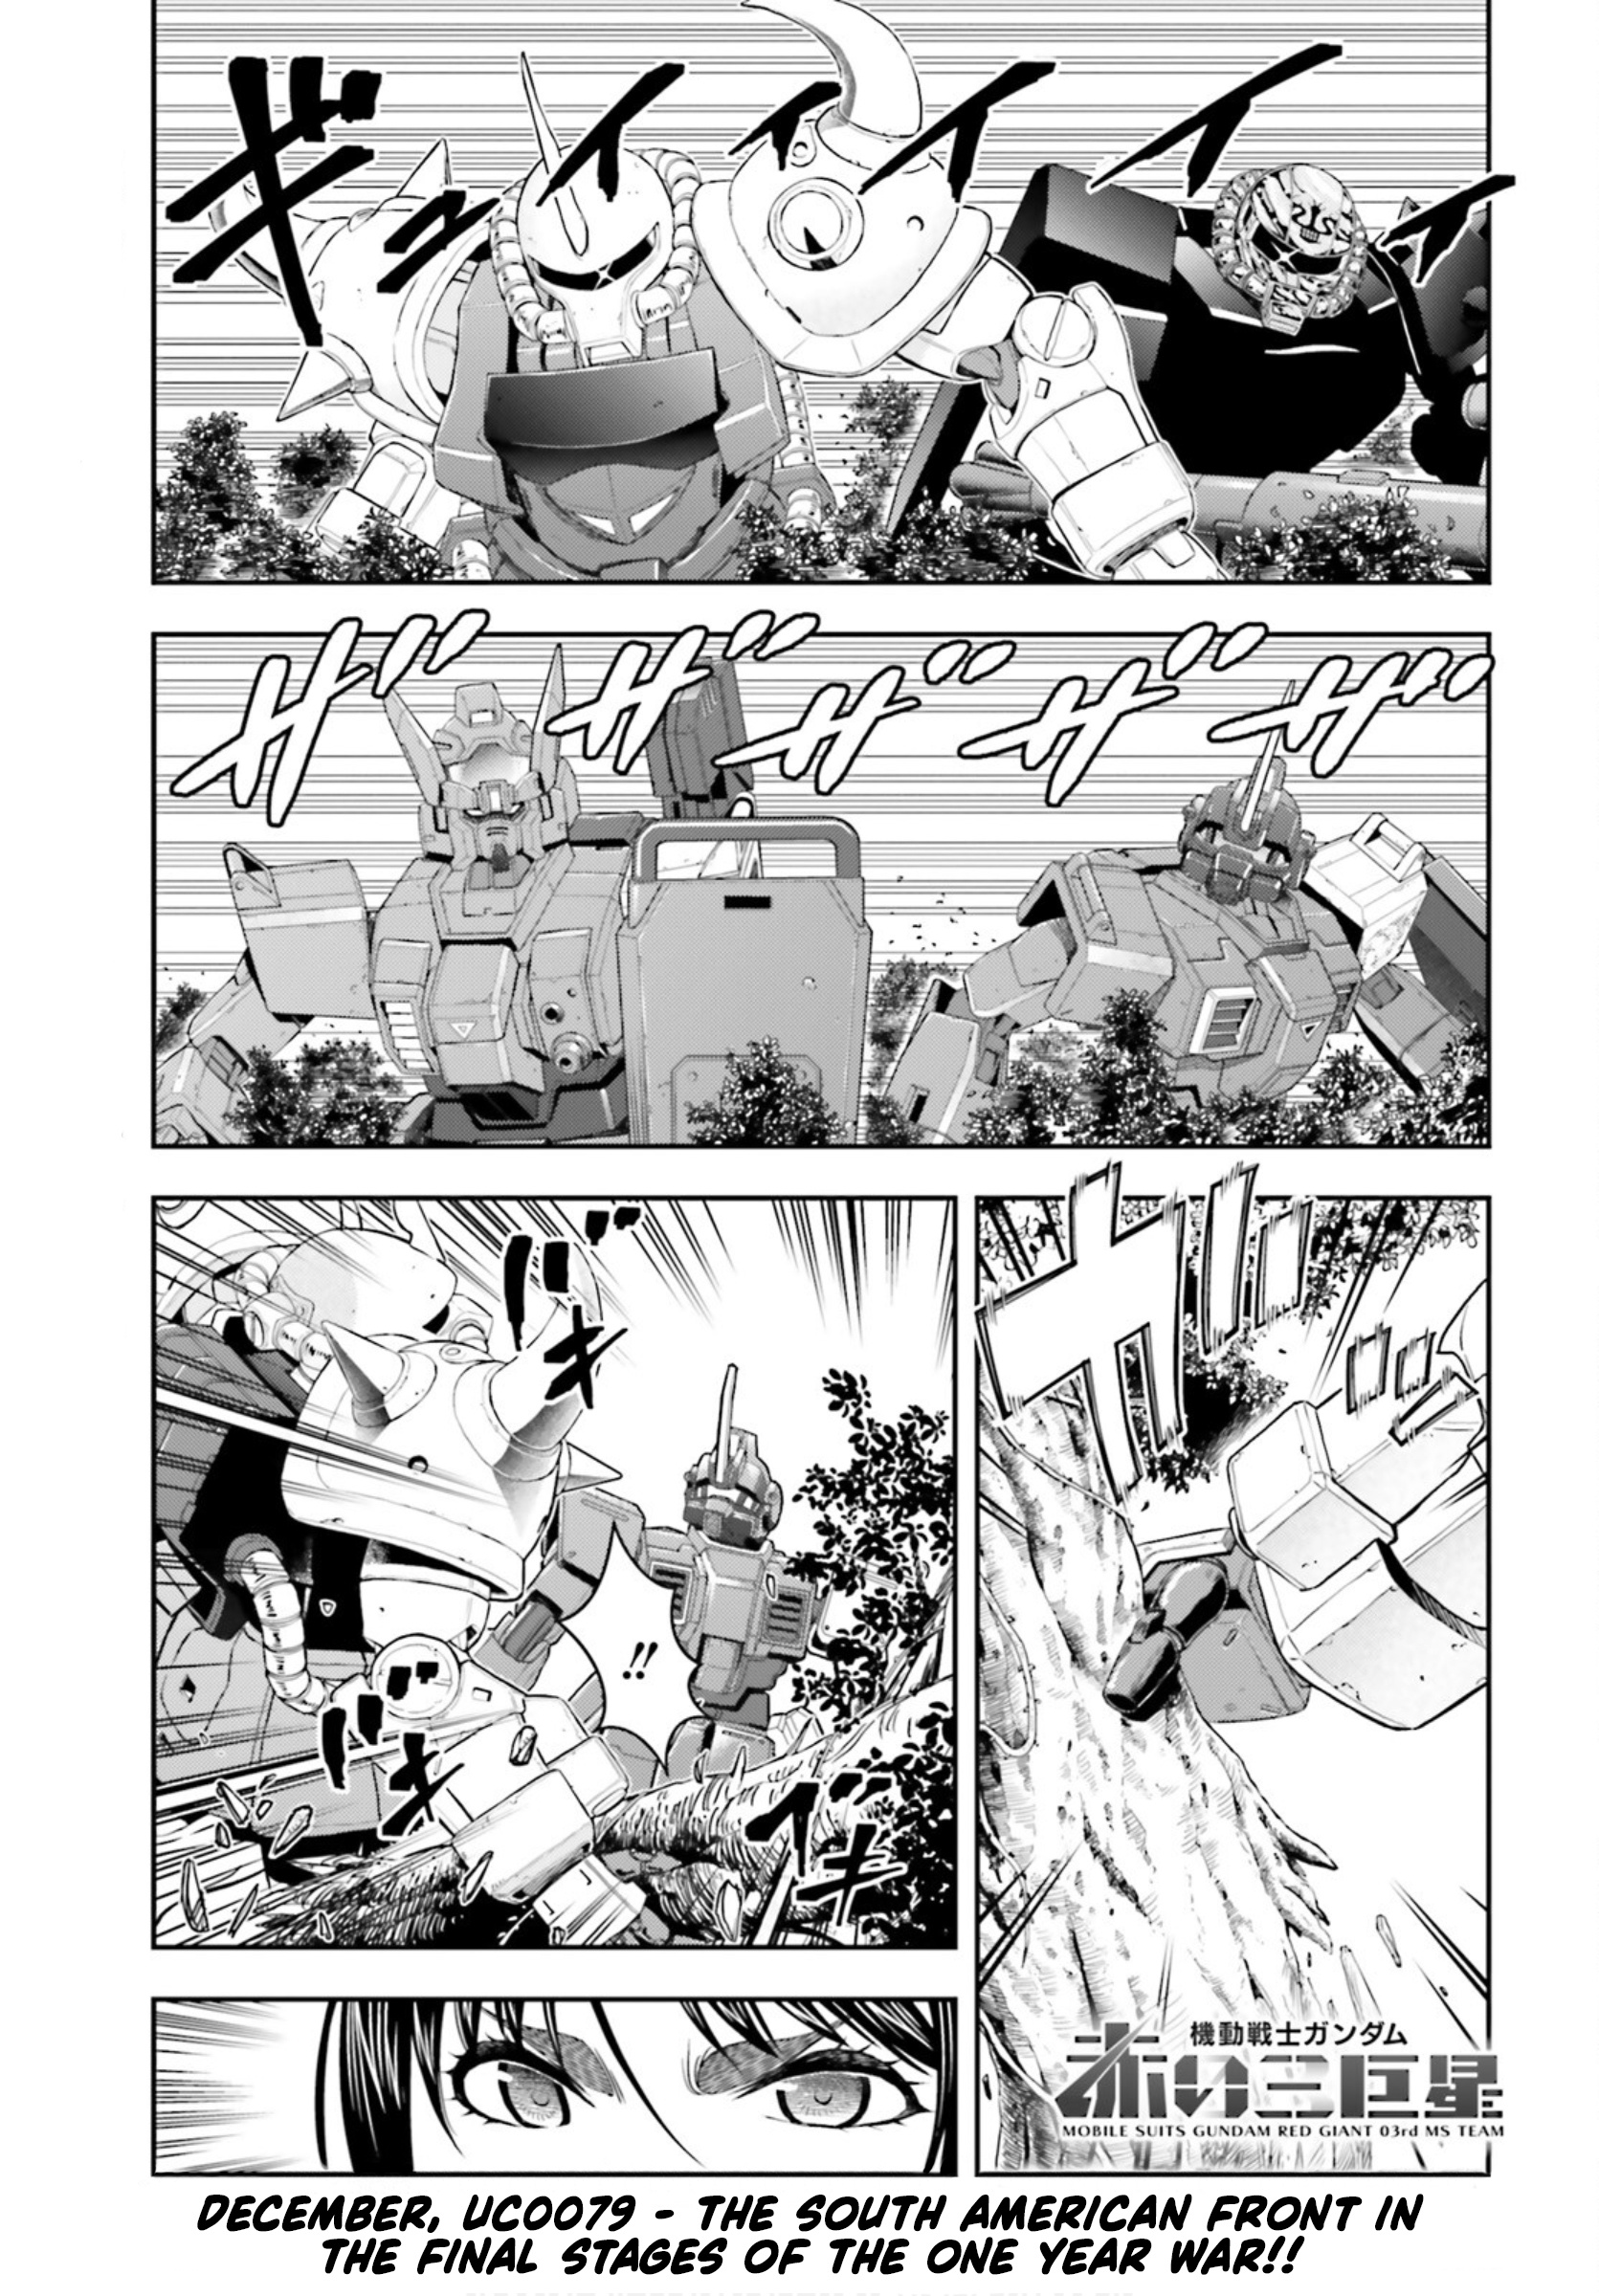 Mobile Suit Gundam: Red Giant 03Rd Ms Team - Page 1